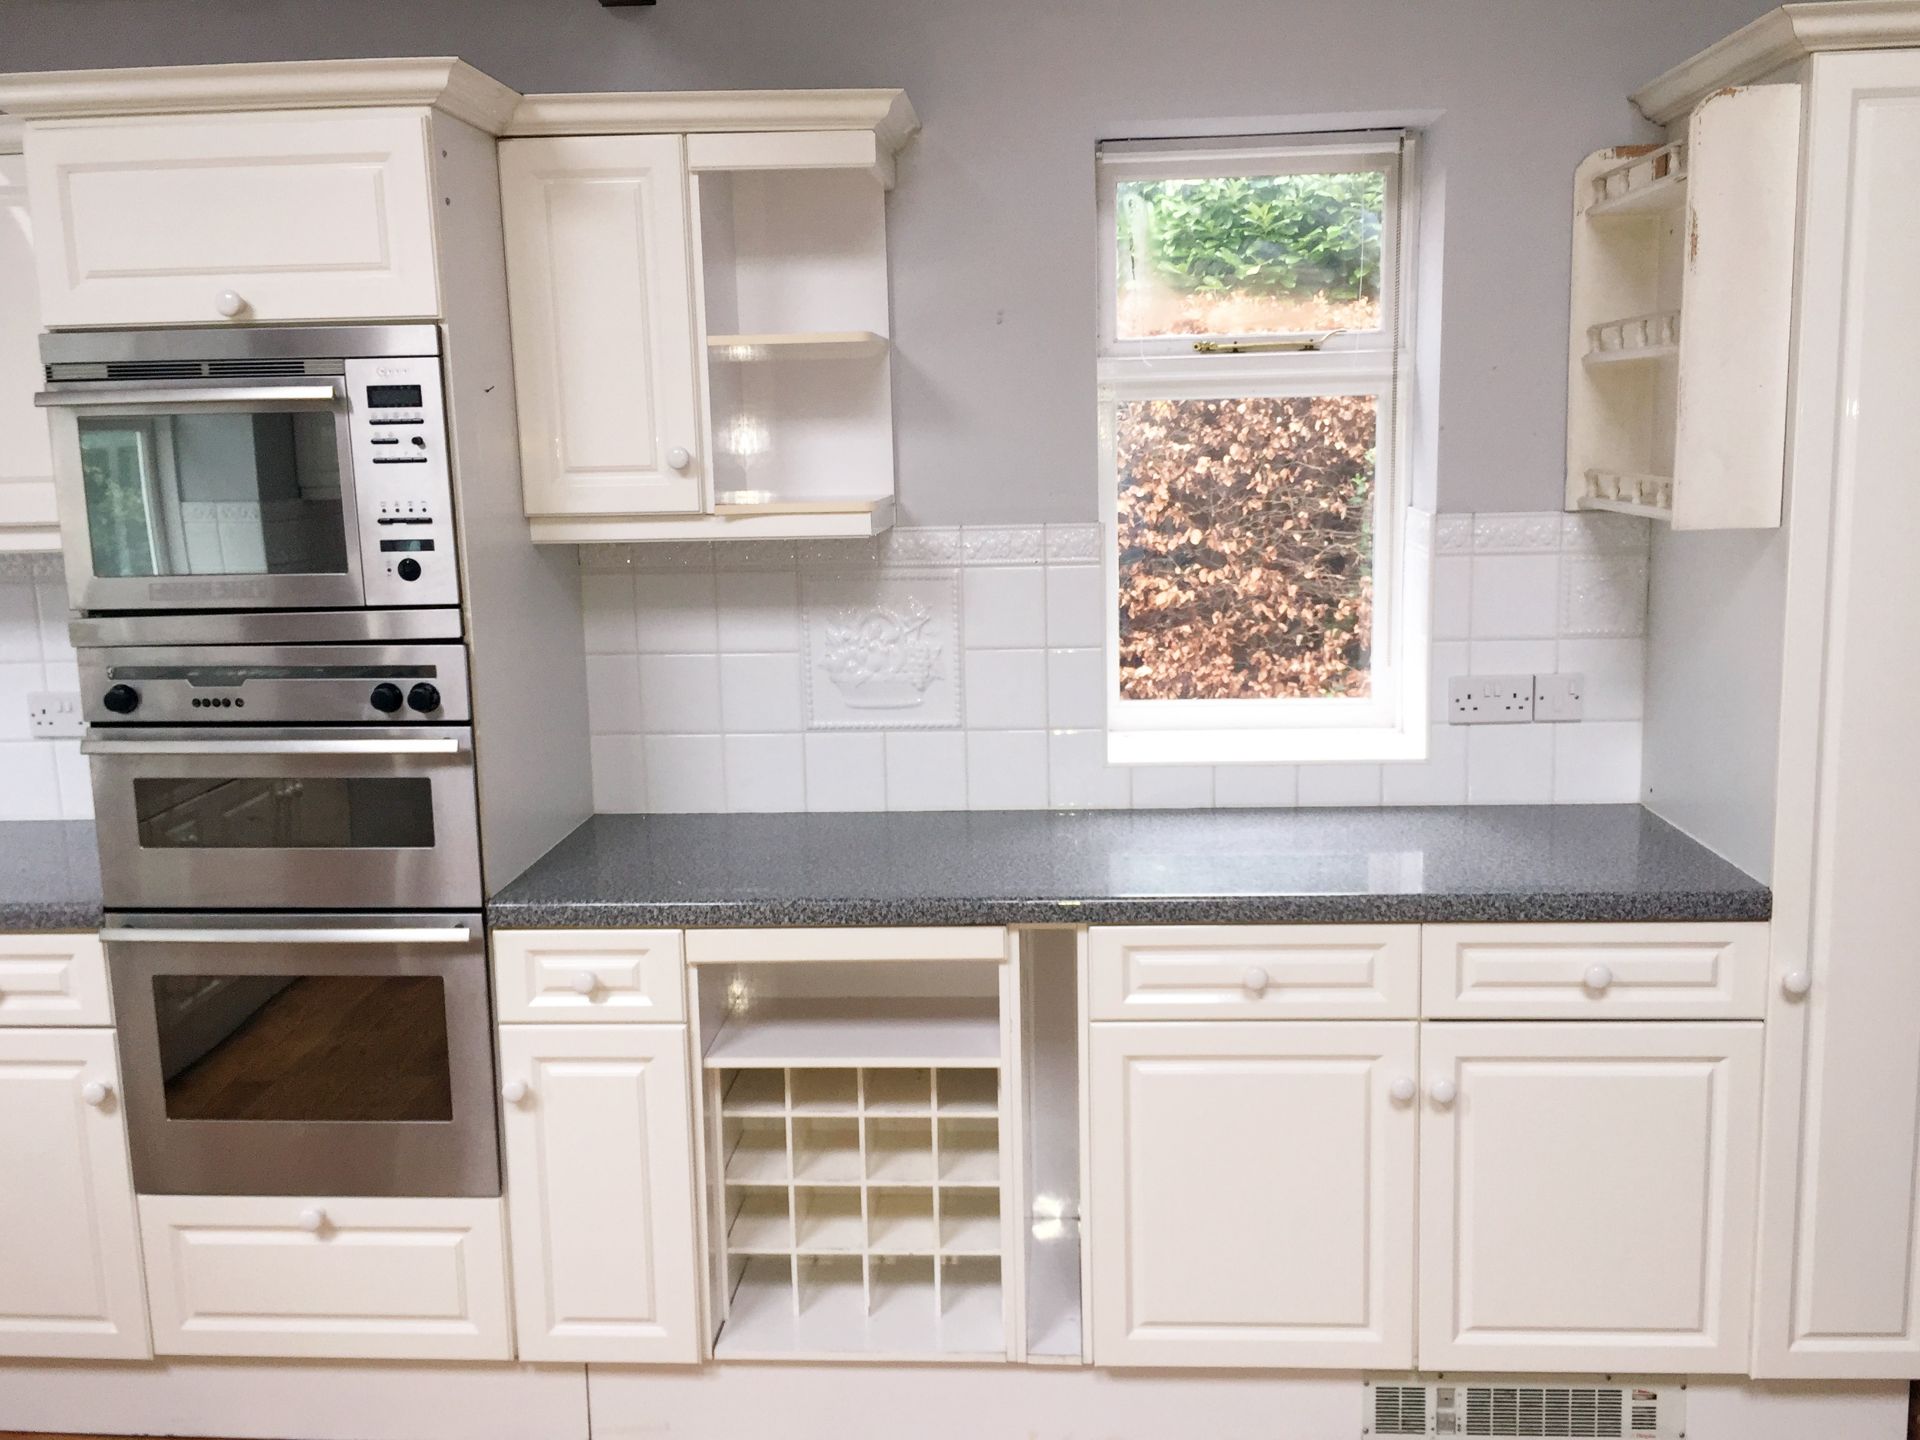 **JUST ADDED** 1 x Spacious Bespoke Fitted Kitchen In Cream With Neff And Whirlpool Appliances - - Image 6 of 37